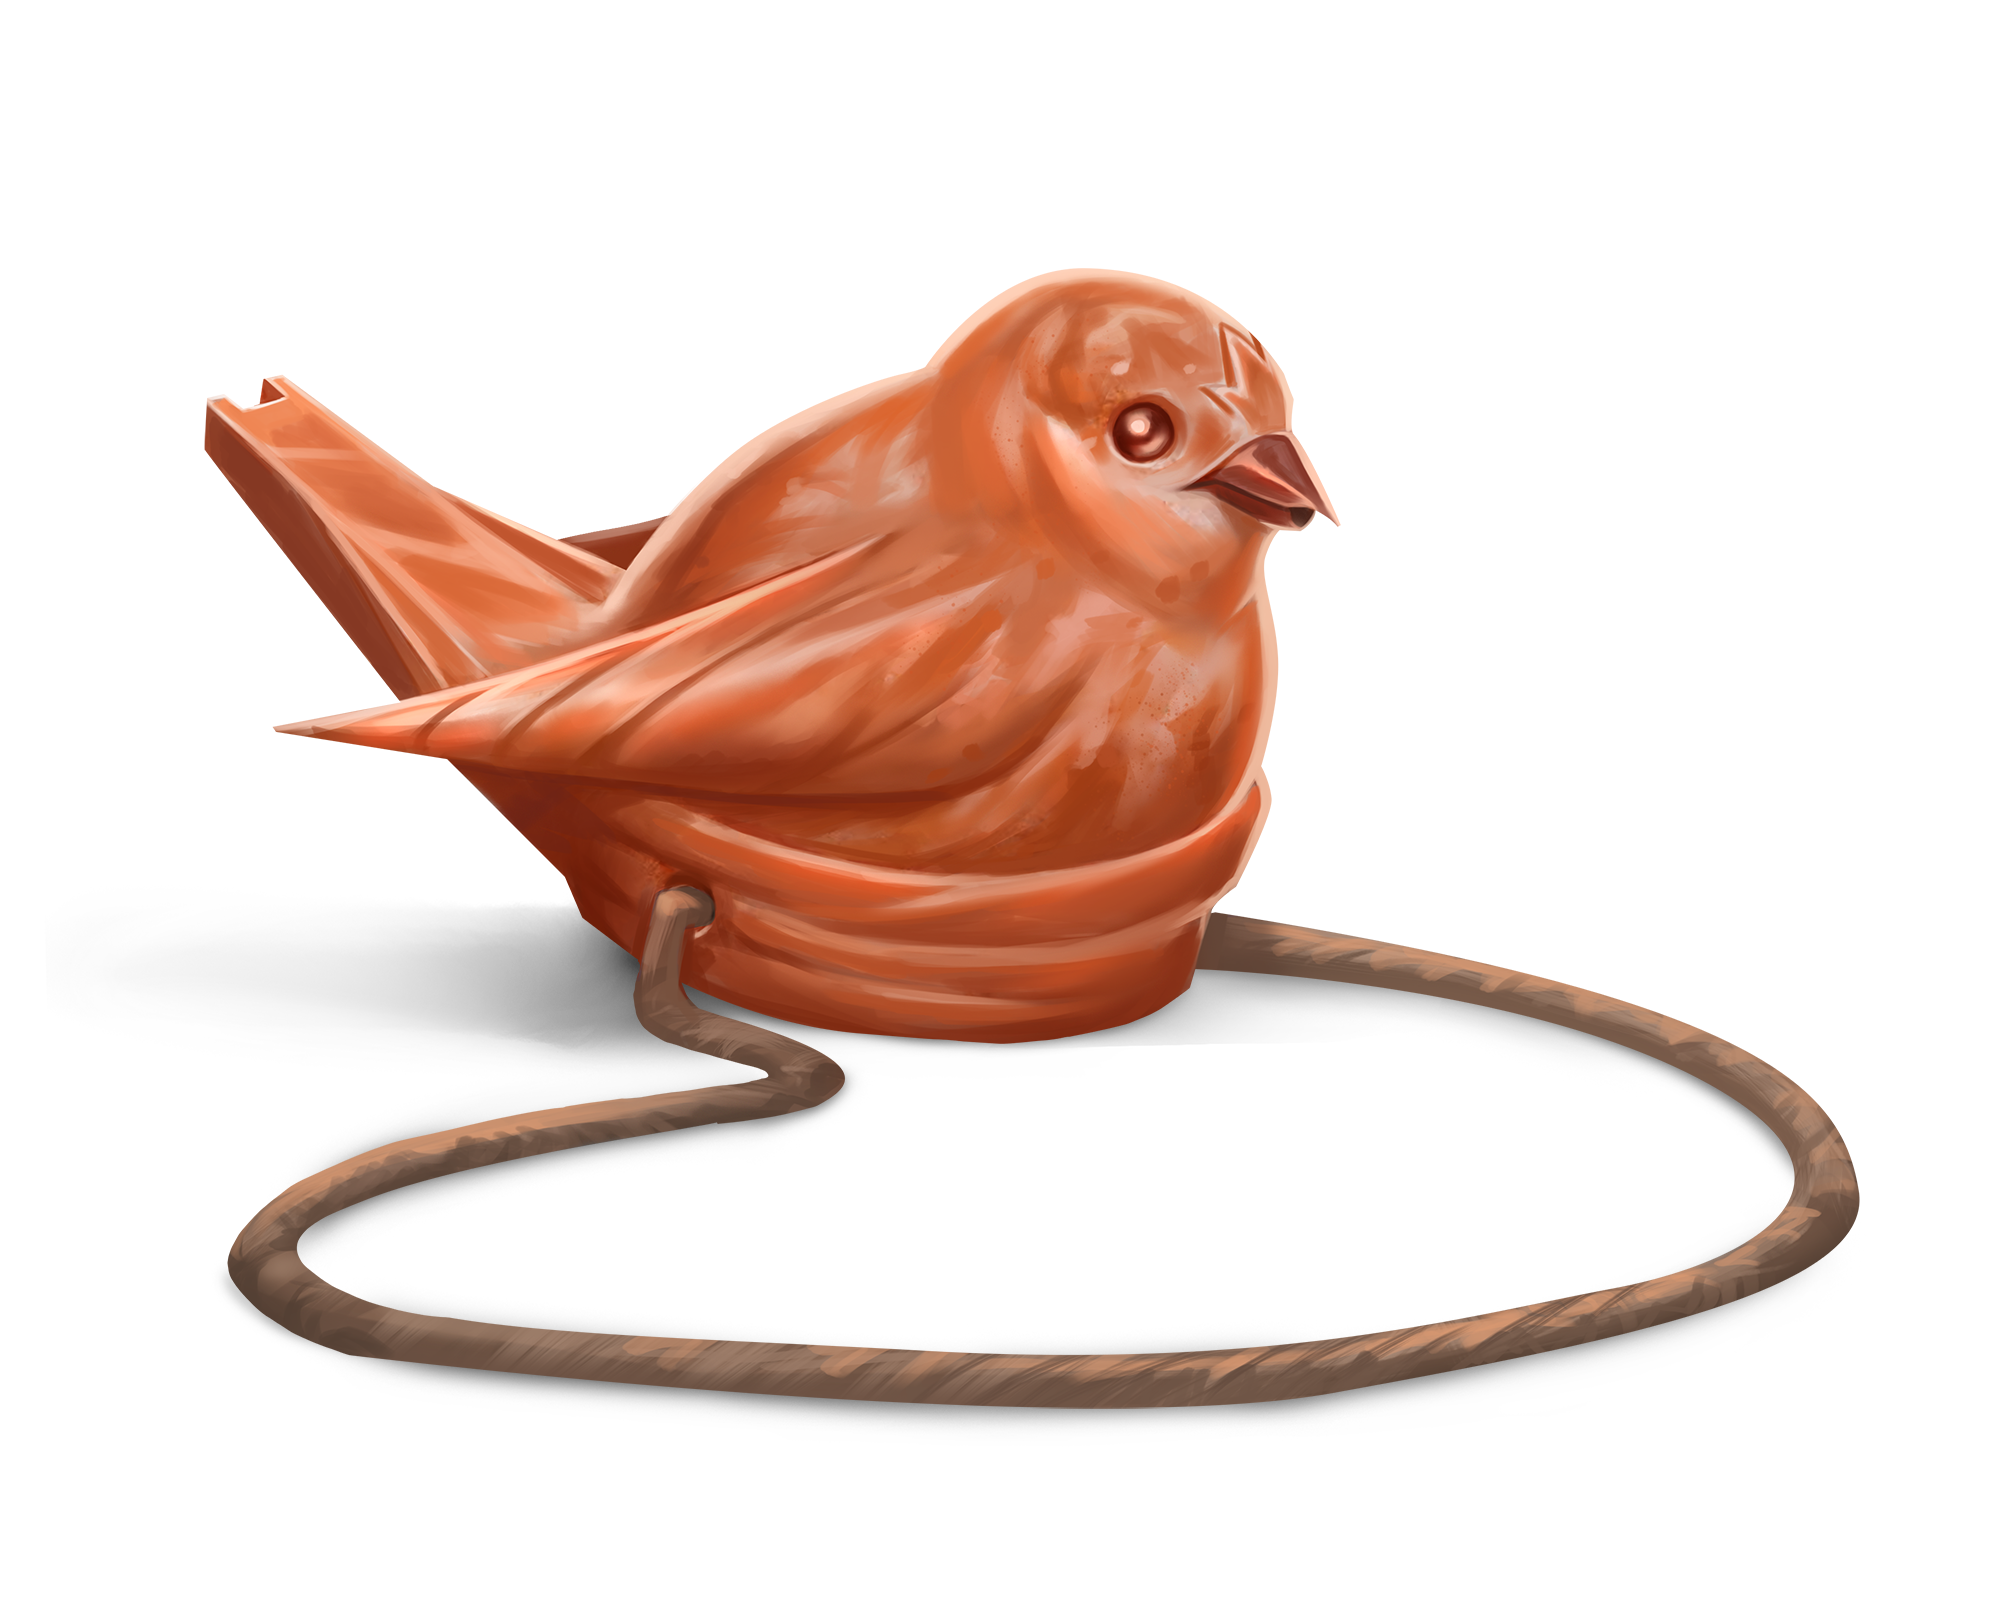 A stone whistle carved from sunstone into the shape of a nesting bird.